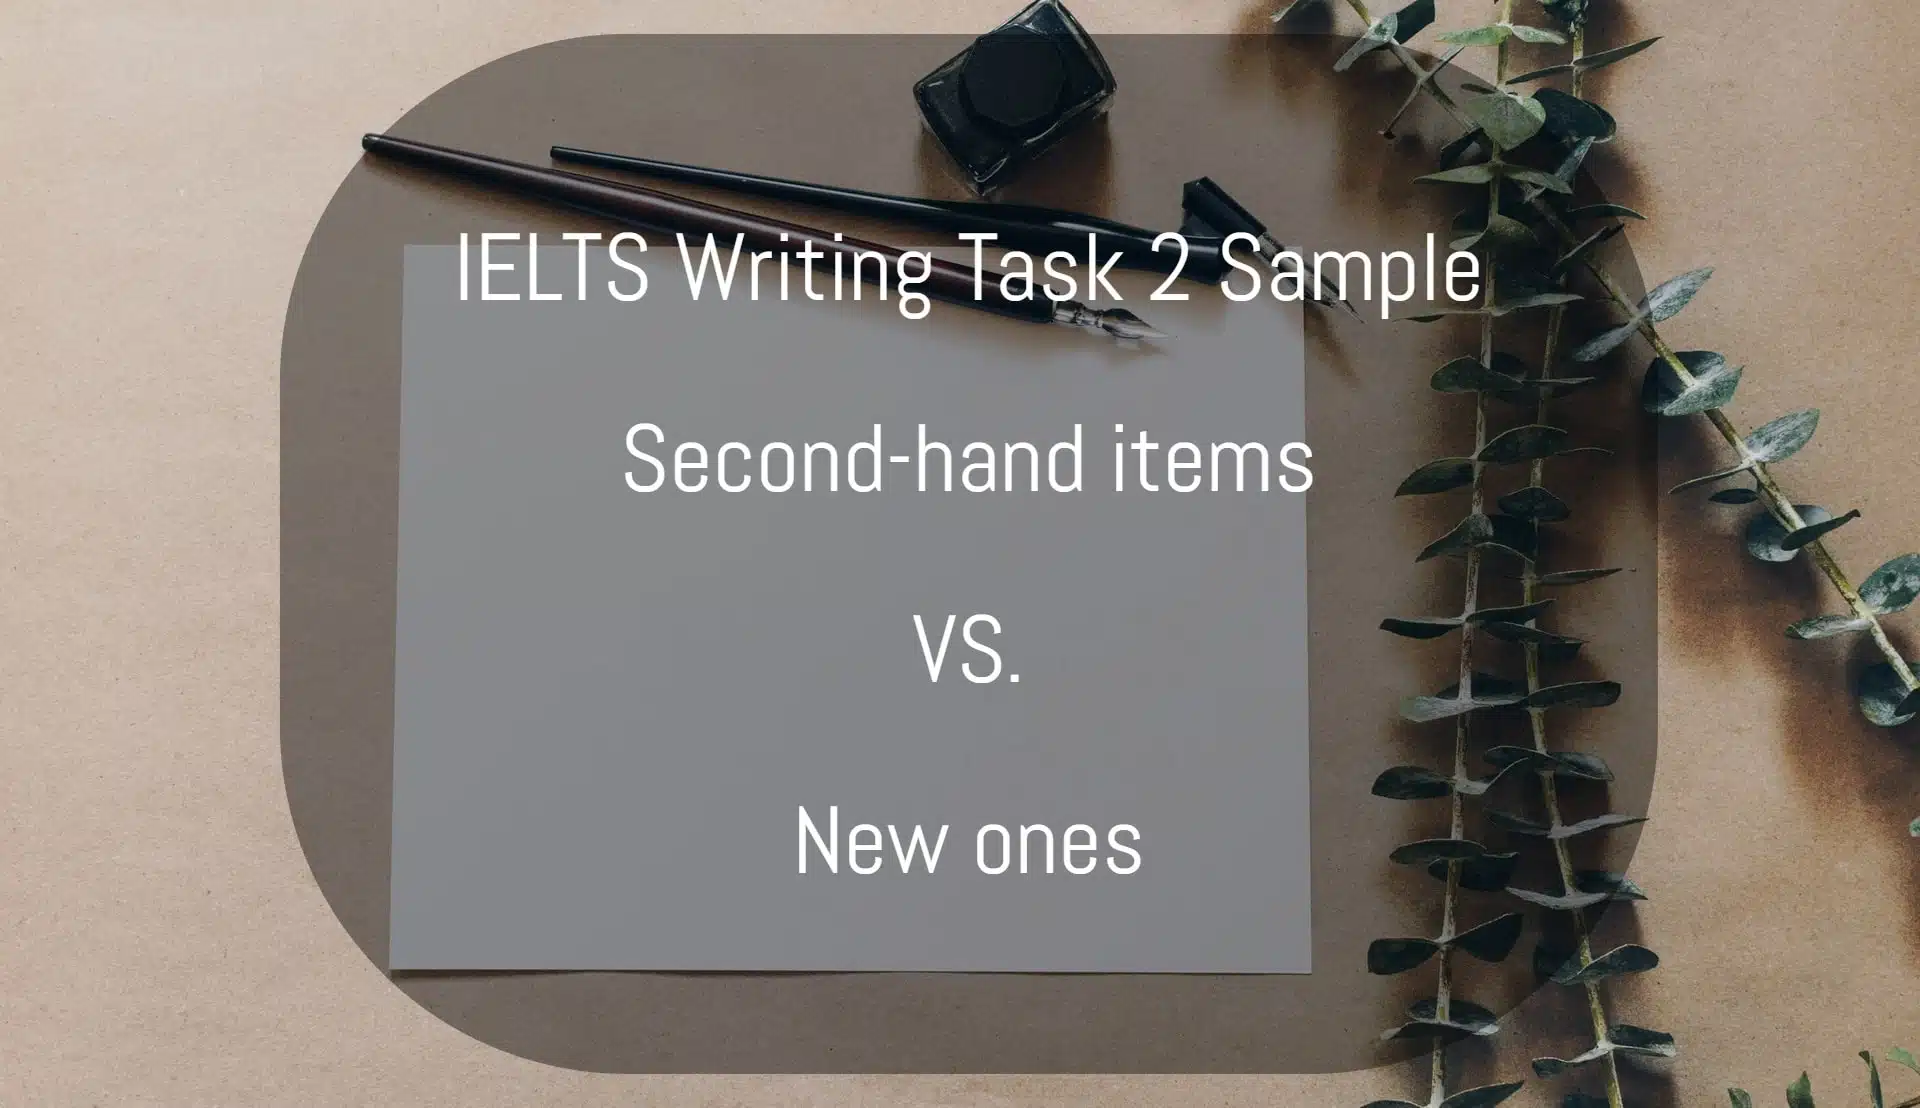 ielts writing task 2 sample second-hand things vs new ones